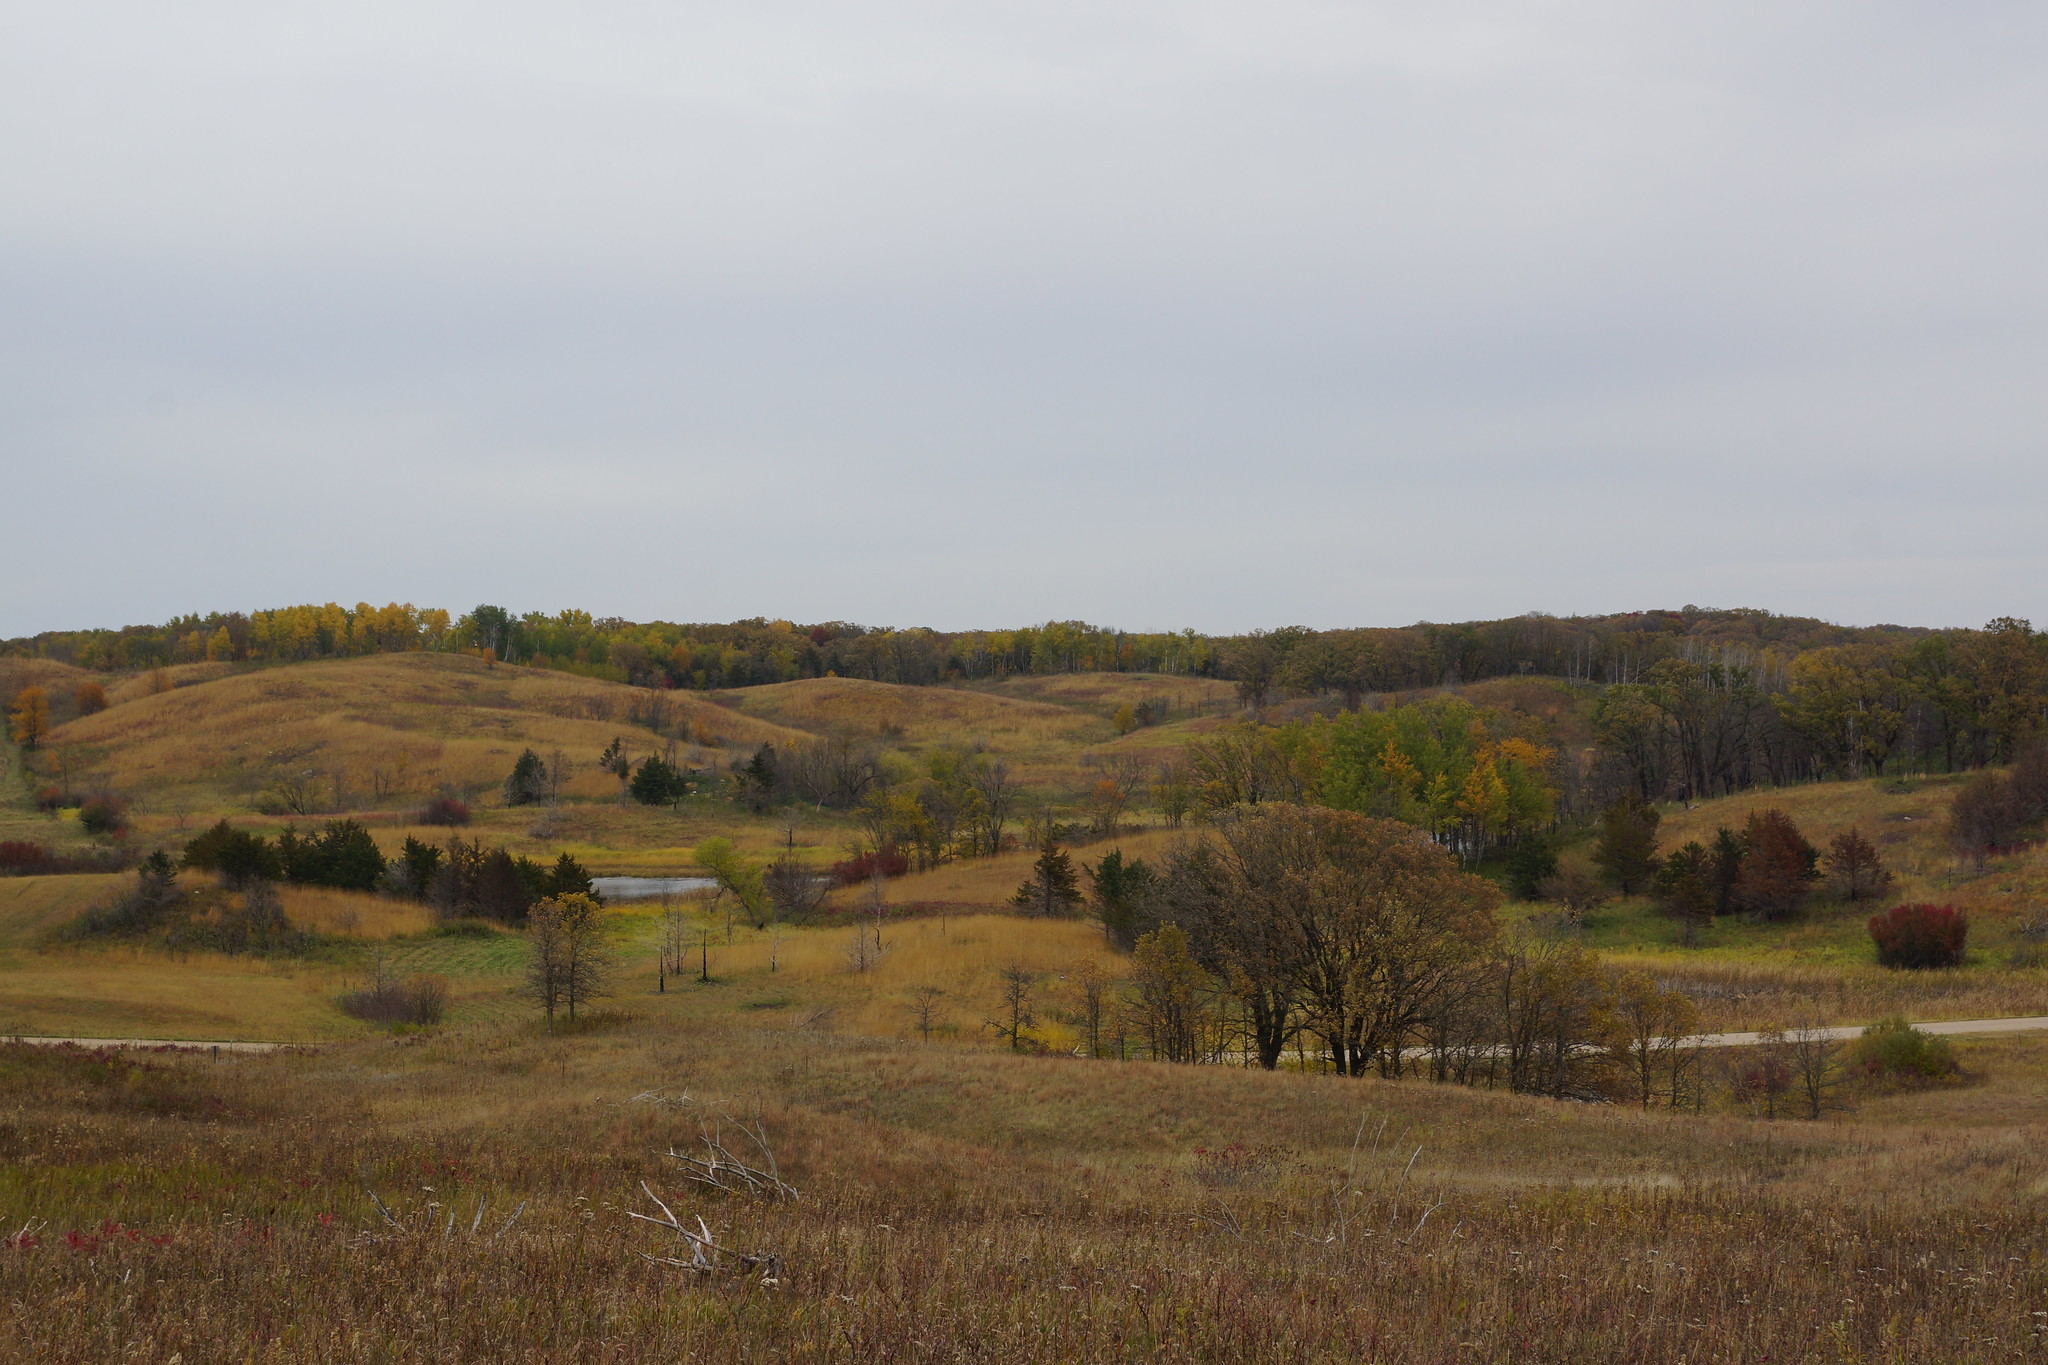 Photograph of the landscape in near the Glacial Ridge Trail, Minnesota. The photo shows a landscape of gently rolling hills covered by grass with patches of trees. The grass is yellow and the trees have green  to yellow leaves, indicating that it is fall. A road can be seen crossing the photo horizontally behind a low hill in the foreground. The sky is overcast.